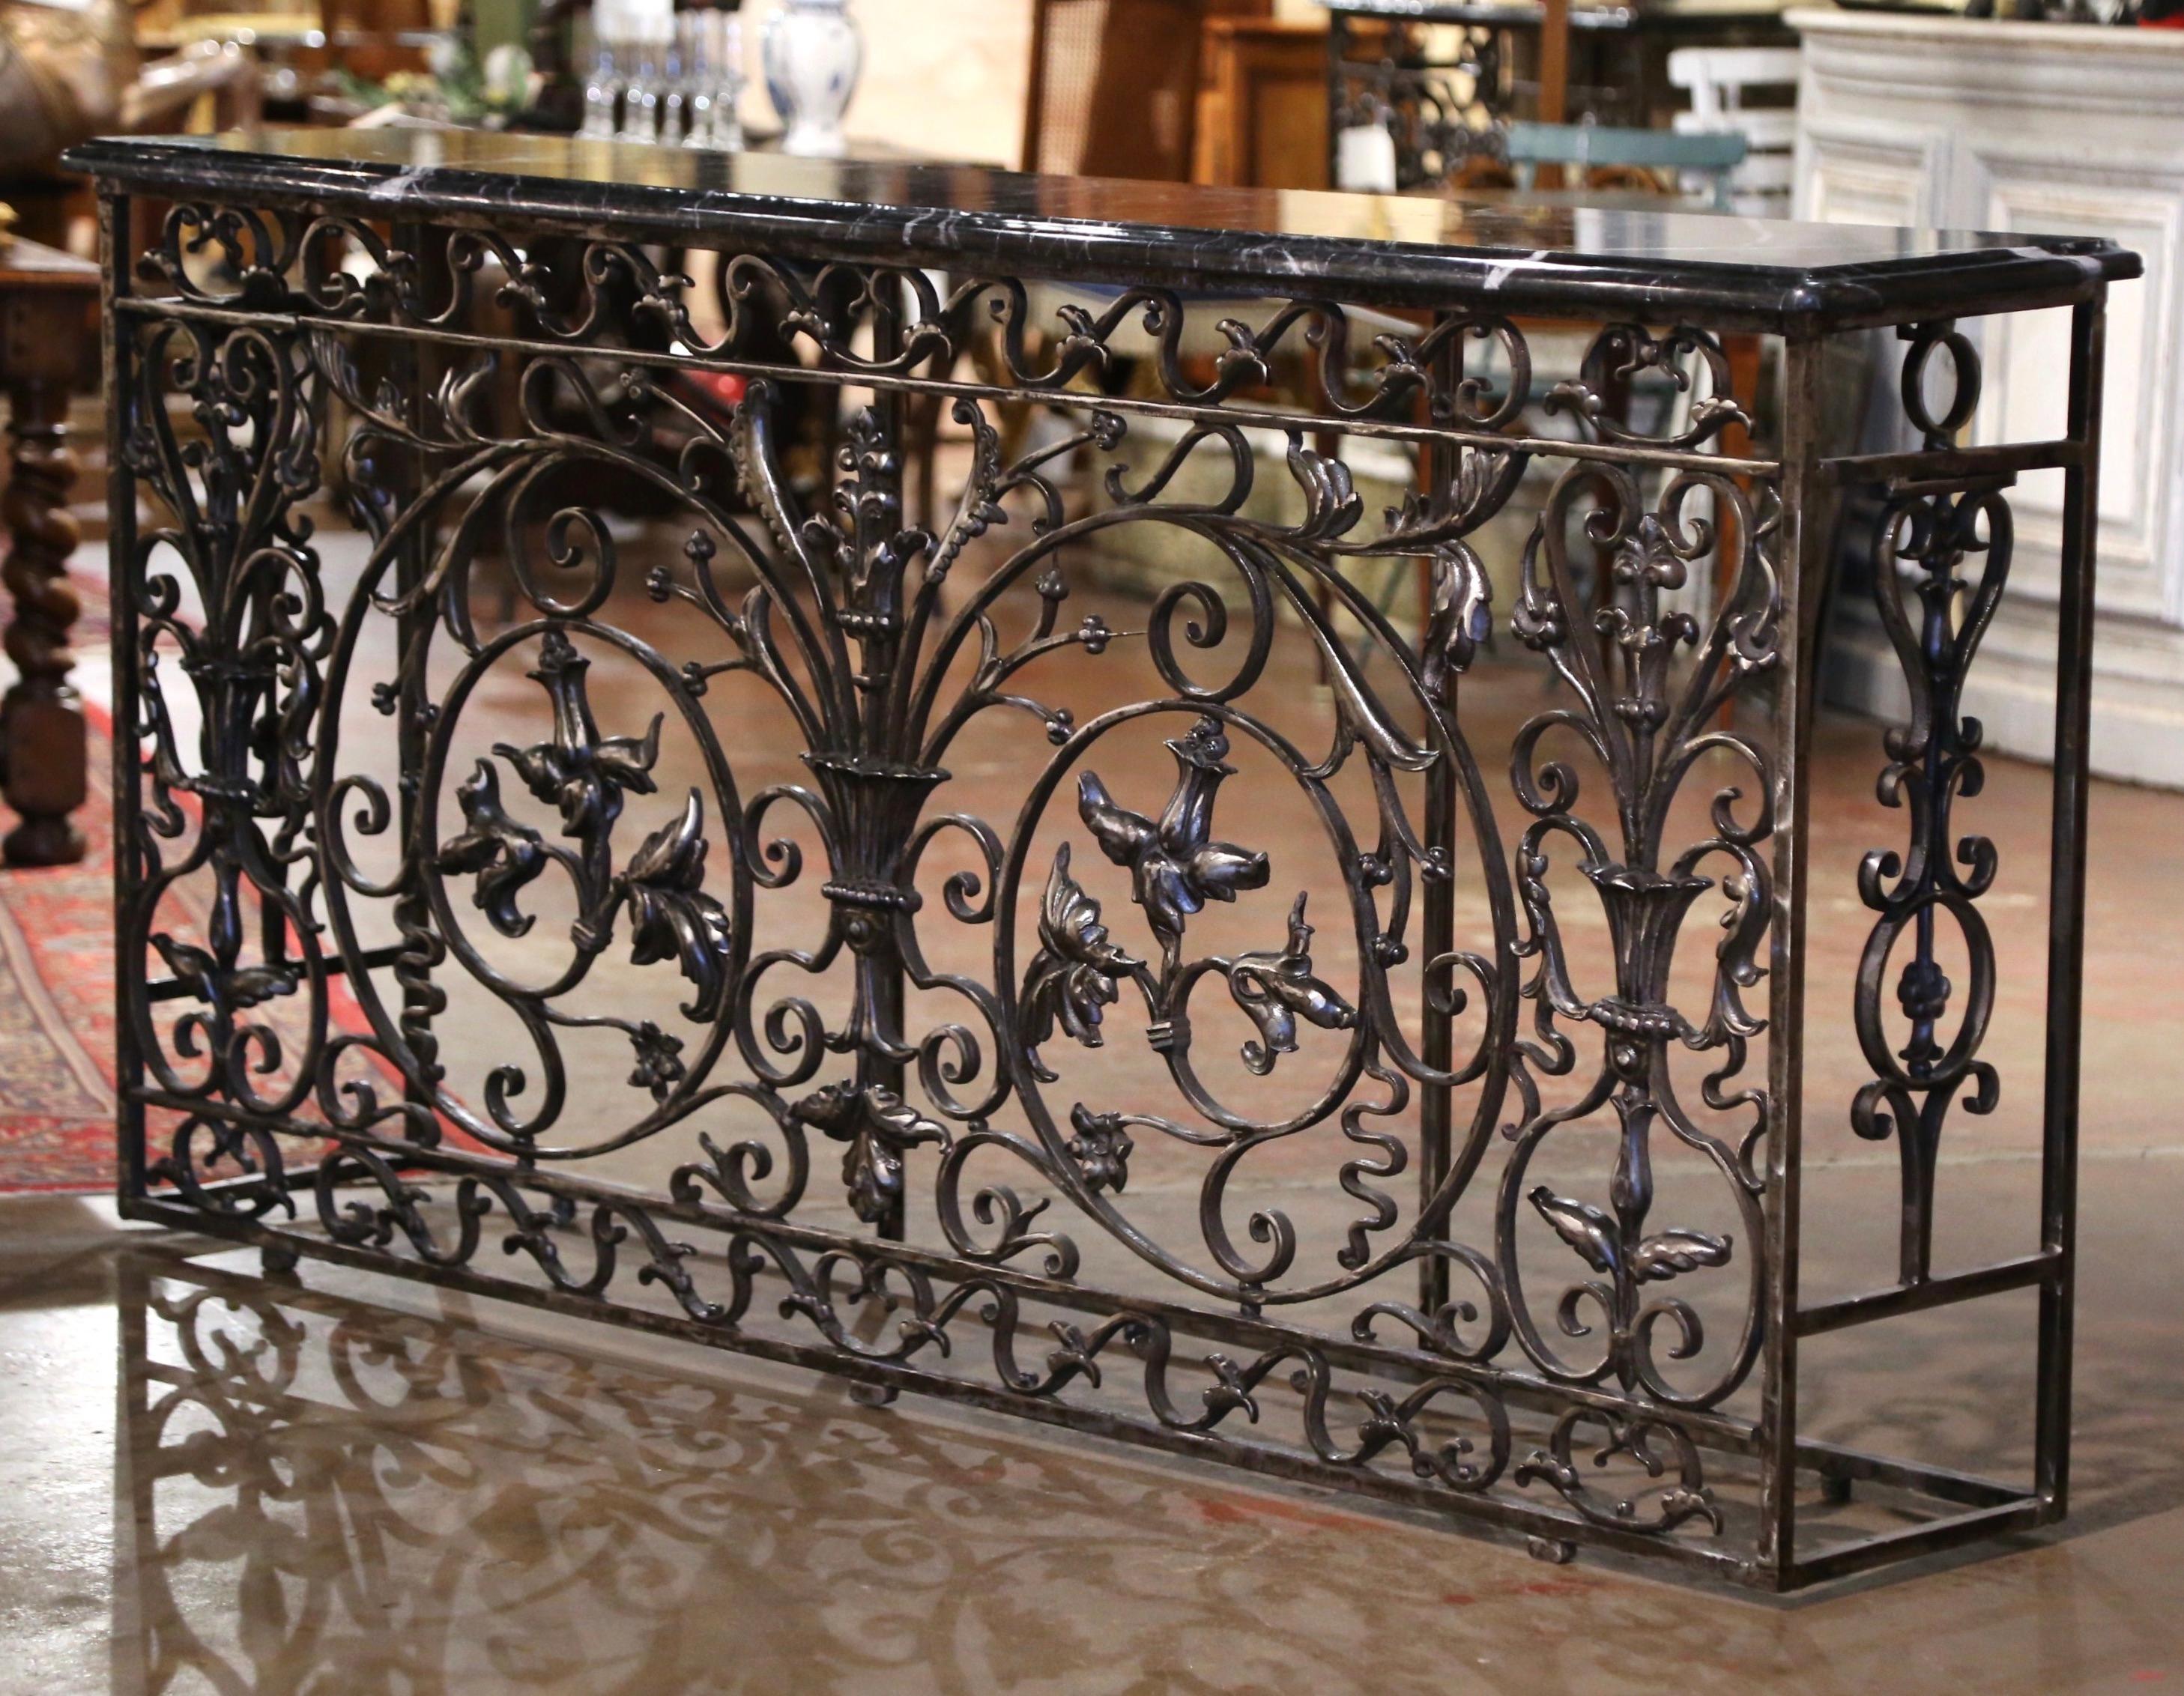 Forged in France circa 1860, the antique console table base stands on straight legs connected with an all around bottom stretcher. Long and narrow, the Louis XV style table features intricate scrolled decor on all three sides, embellished with a